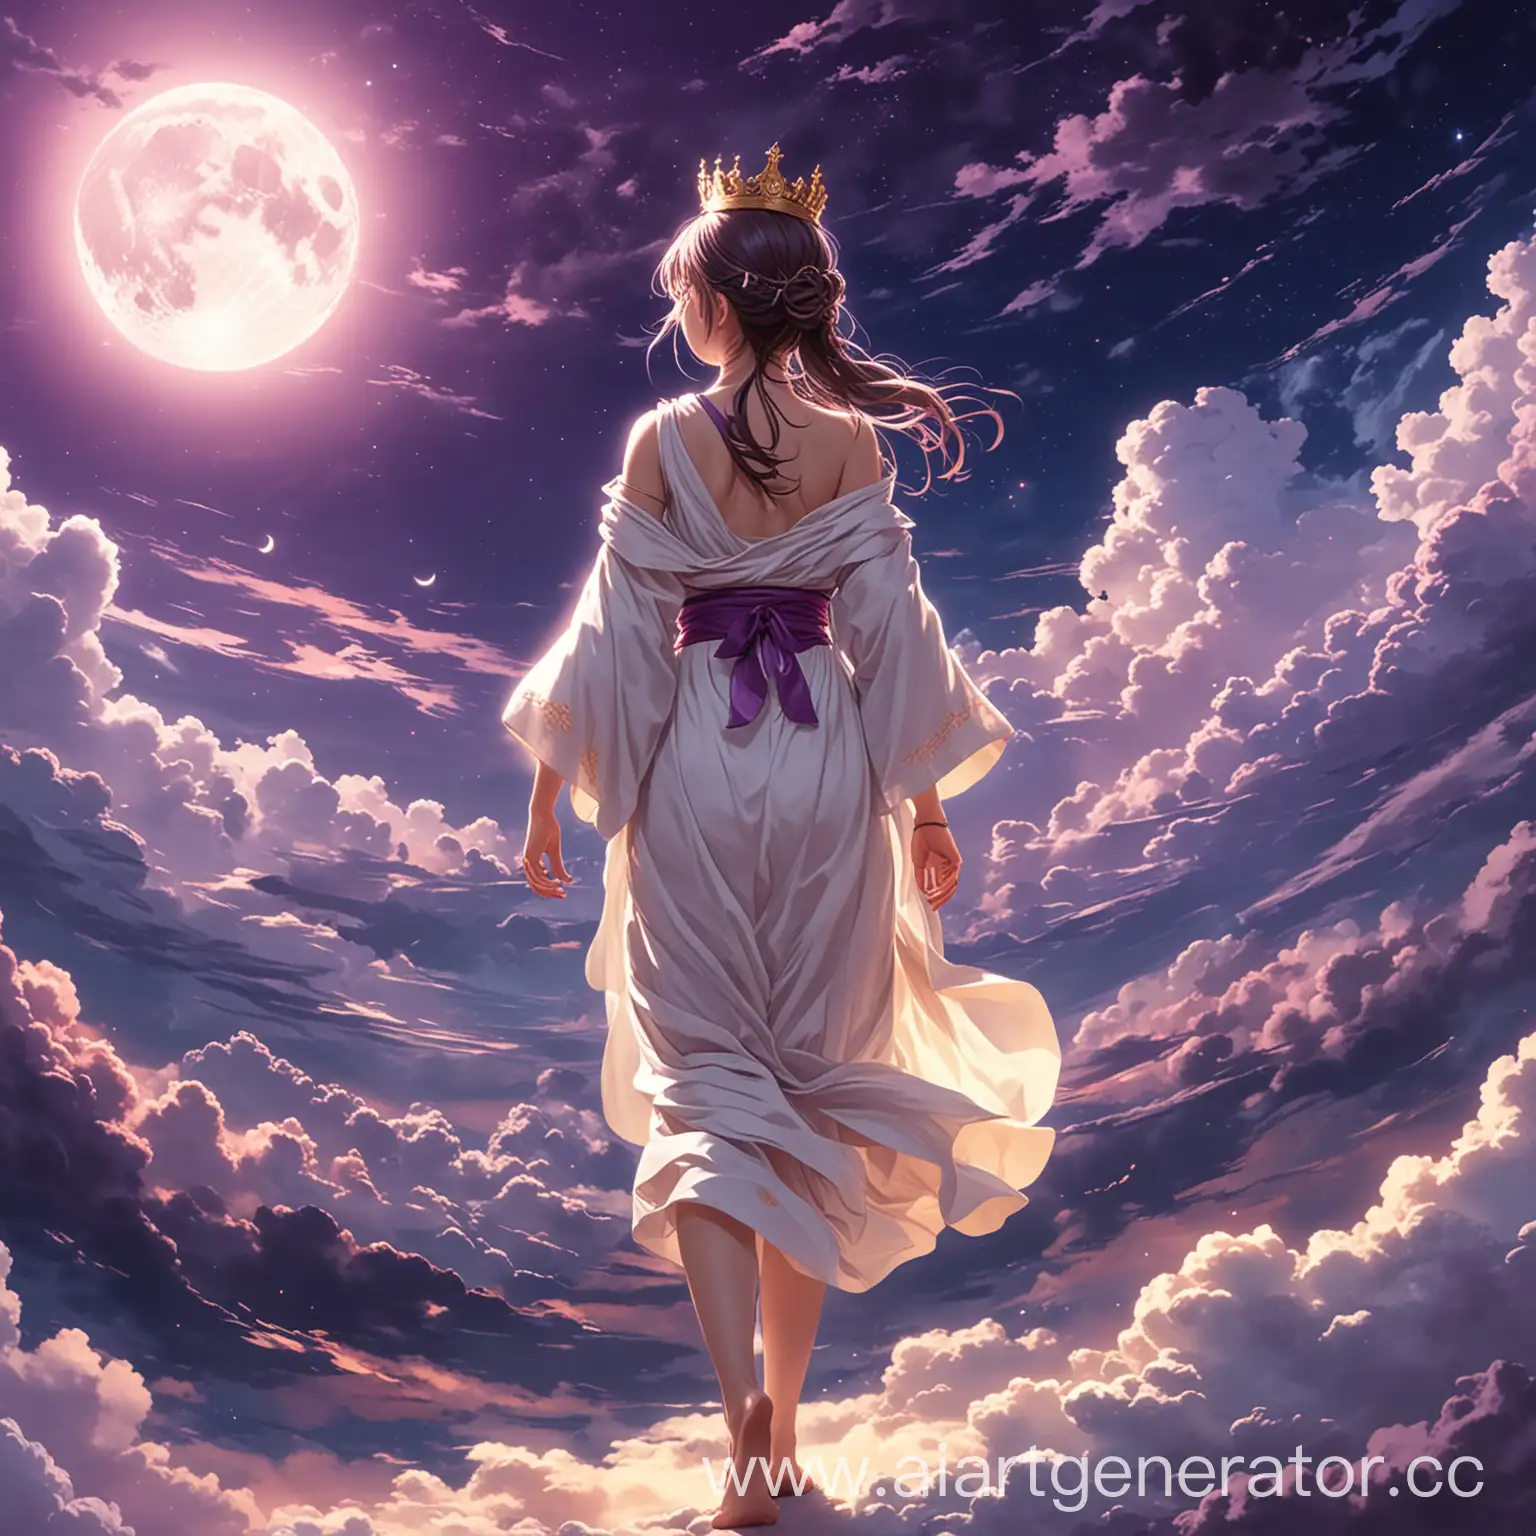 Anime-Girl-in-White-Toga-Crowned-Walking-Among-Clouds-Towards-Moon-in-Purple-Sky